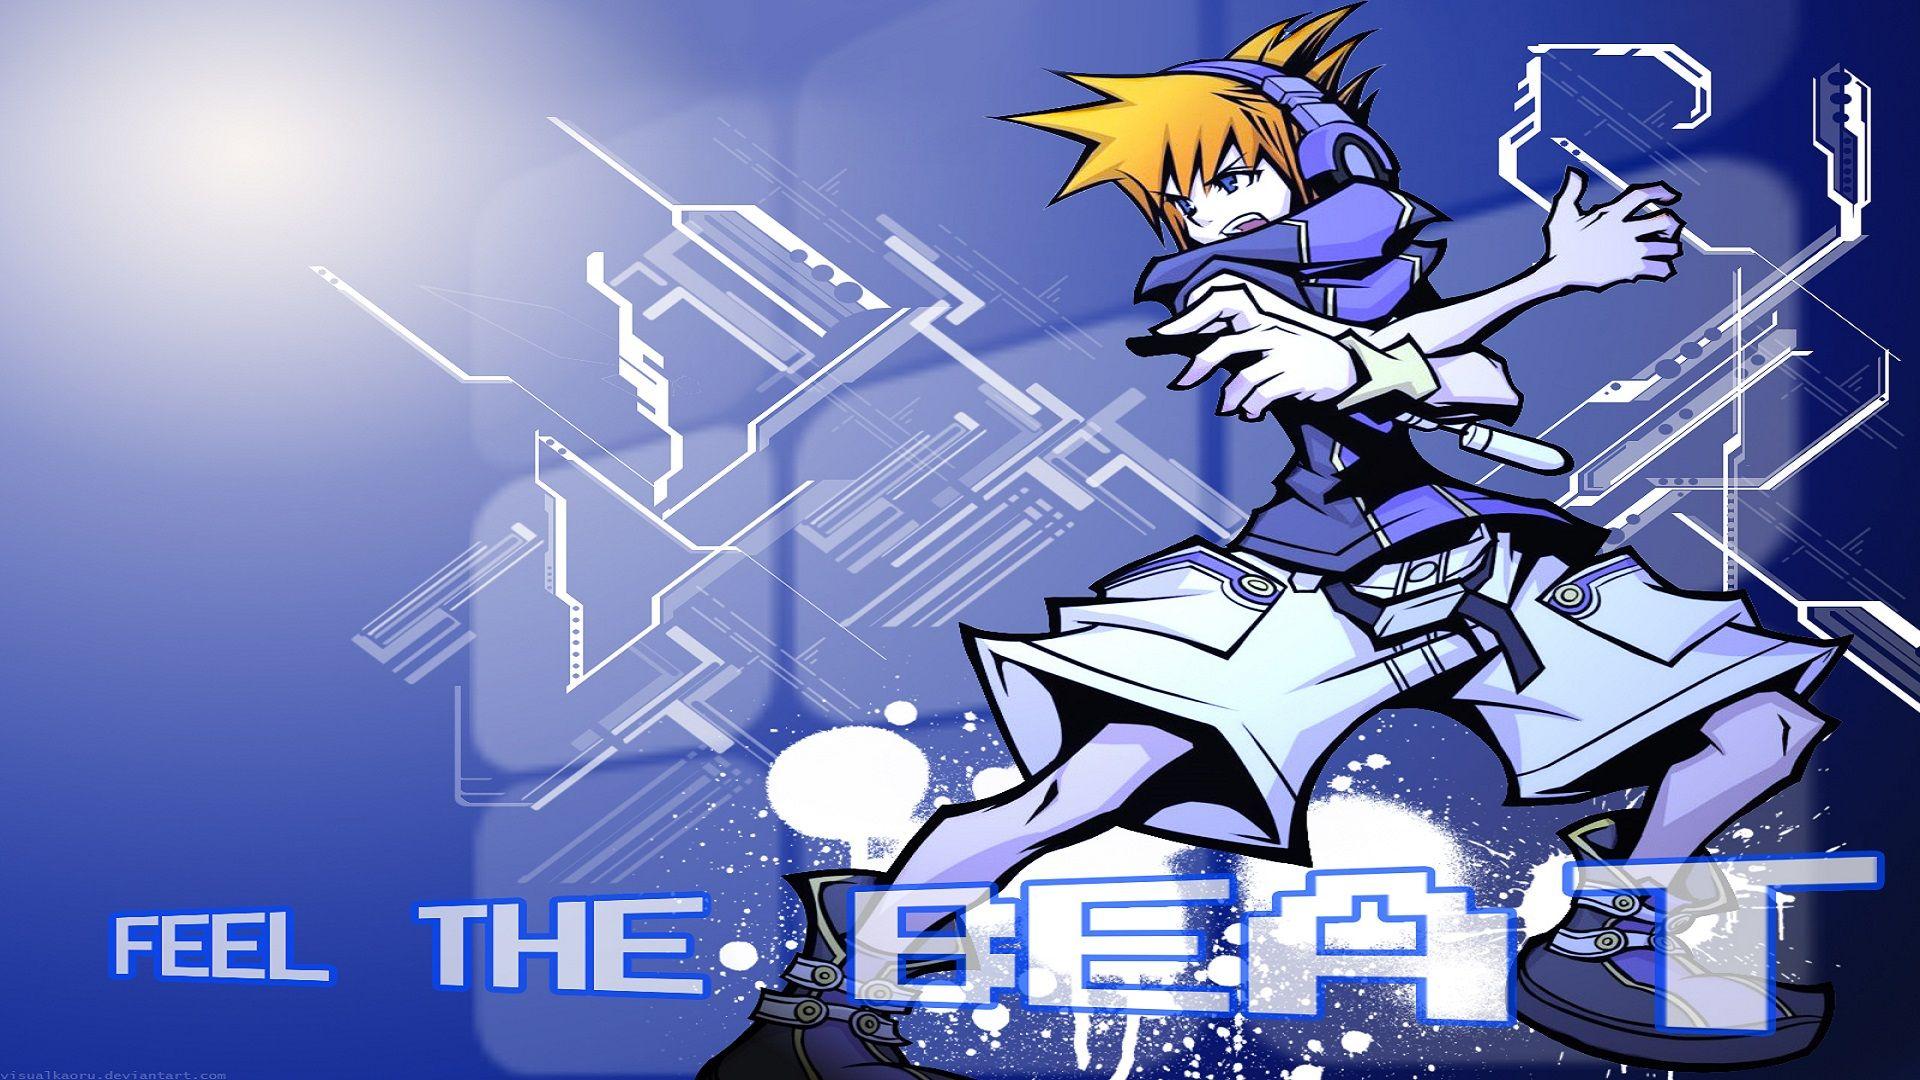 Save The World Ends with You Wallpaper. Read games reviews, play